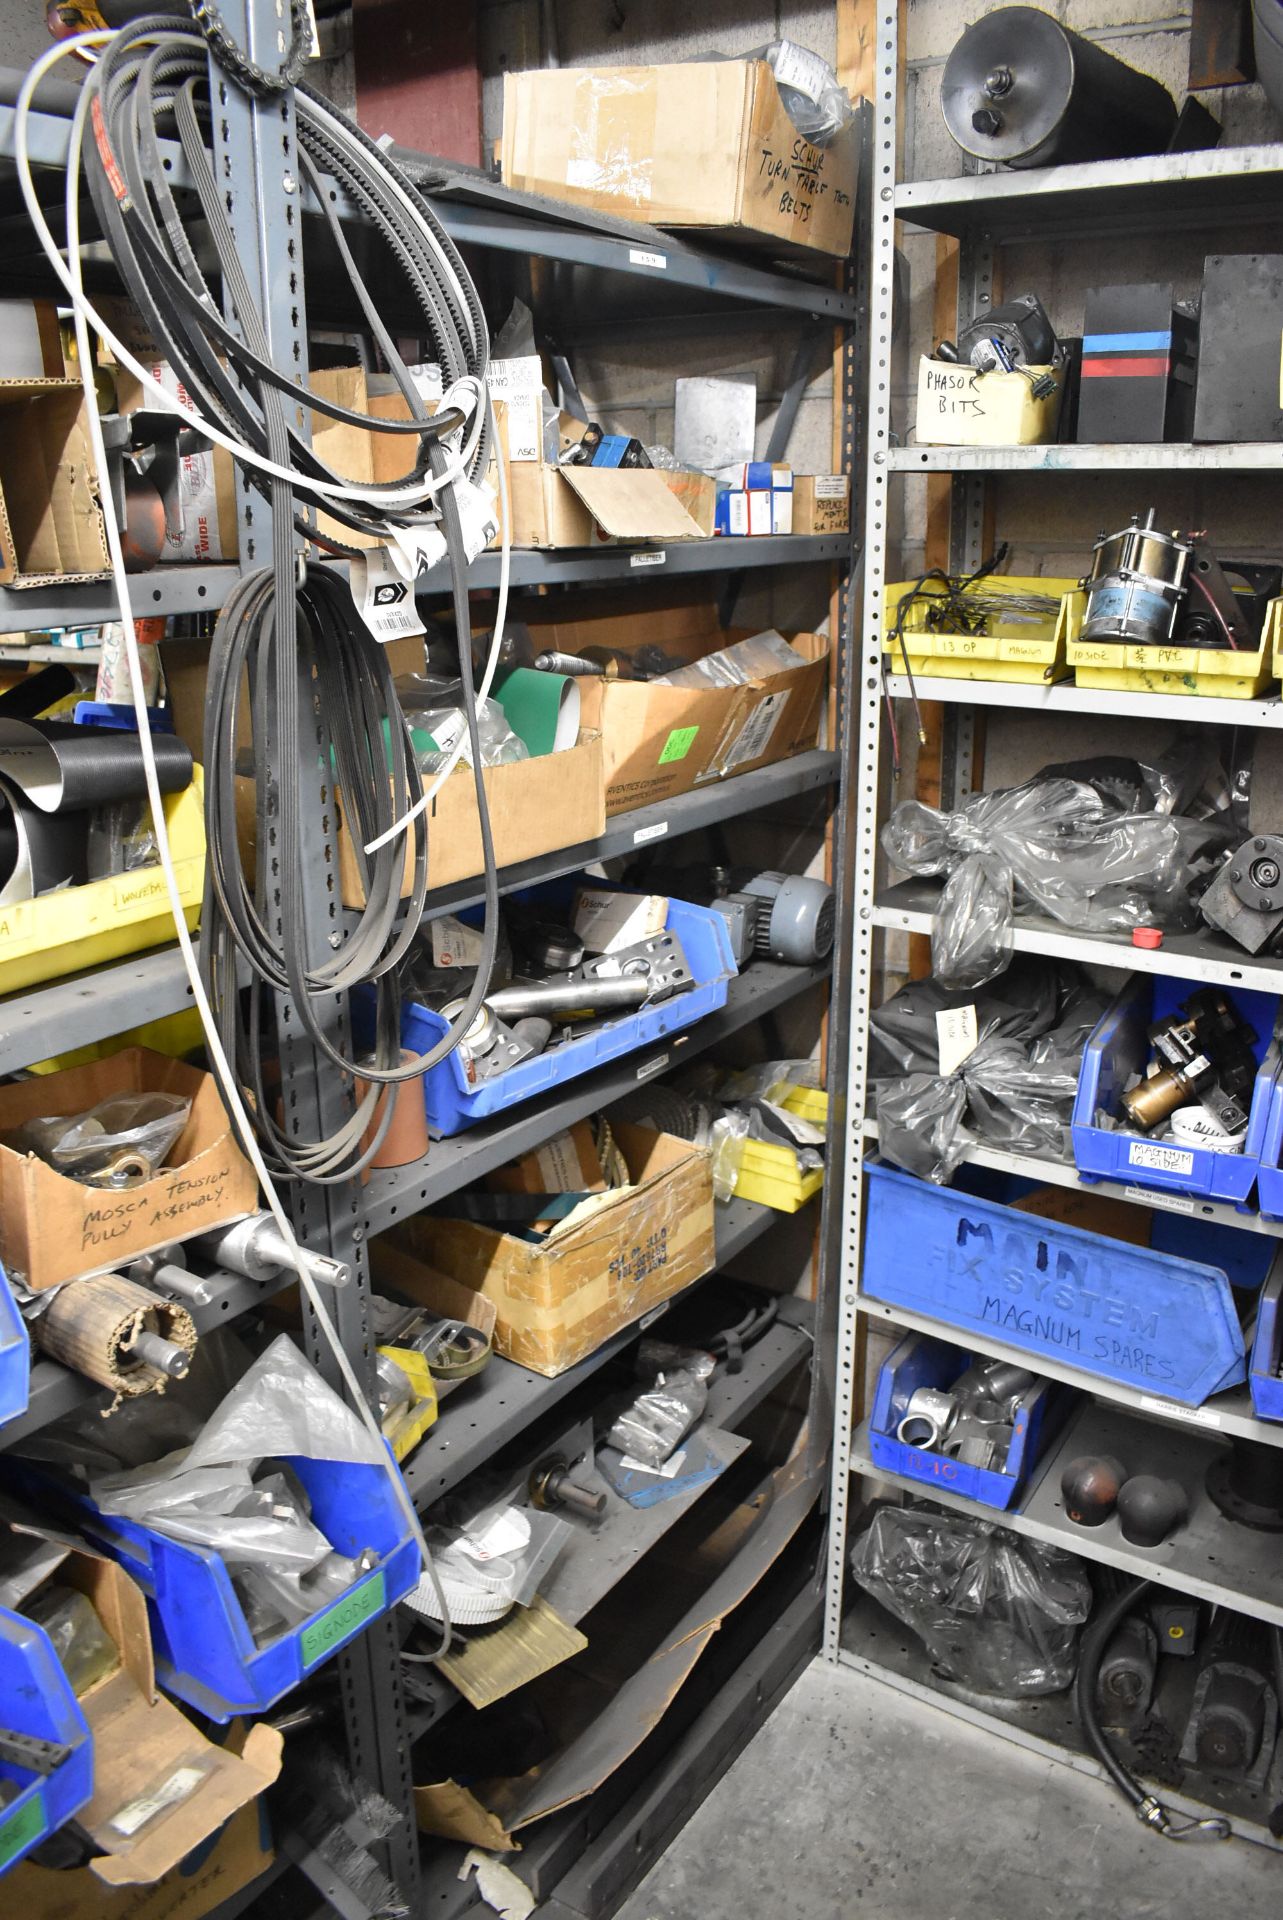 LOT/ (5) SECTIONS OF STEEL SHELVING WITH CONTENTS - INCLUDING BEARINGS, DRIVE BELTS, GAUGES, - Image 18 of 26